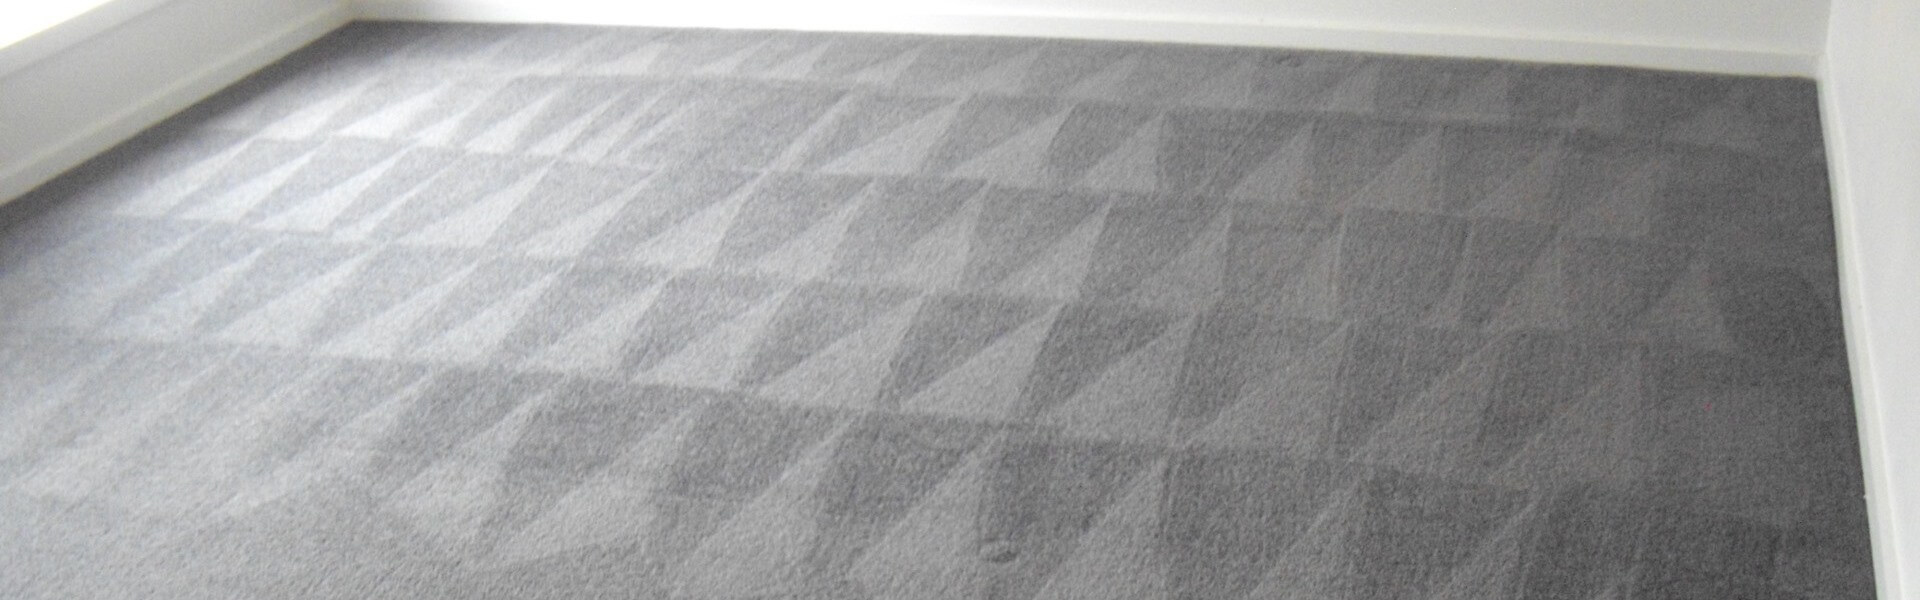 Household Carpet Steam Cleaning